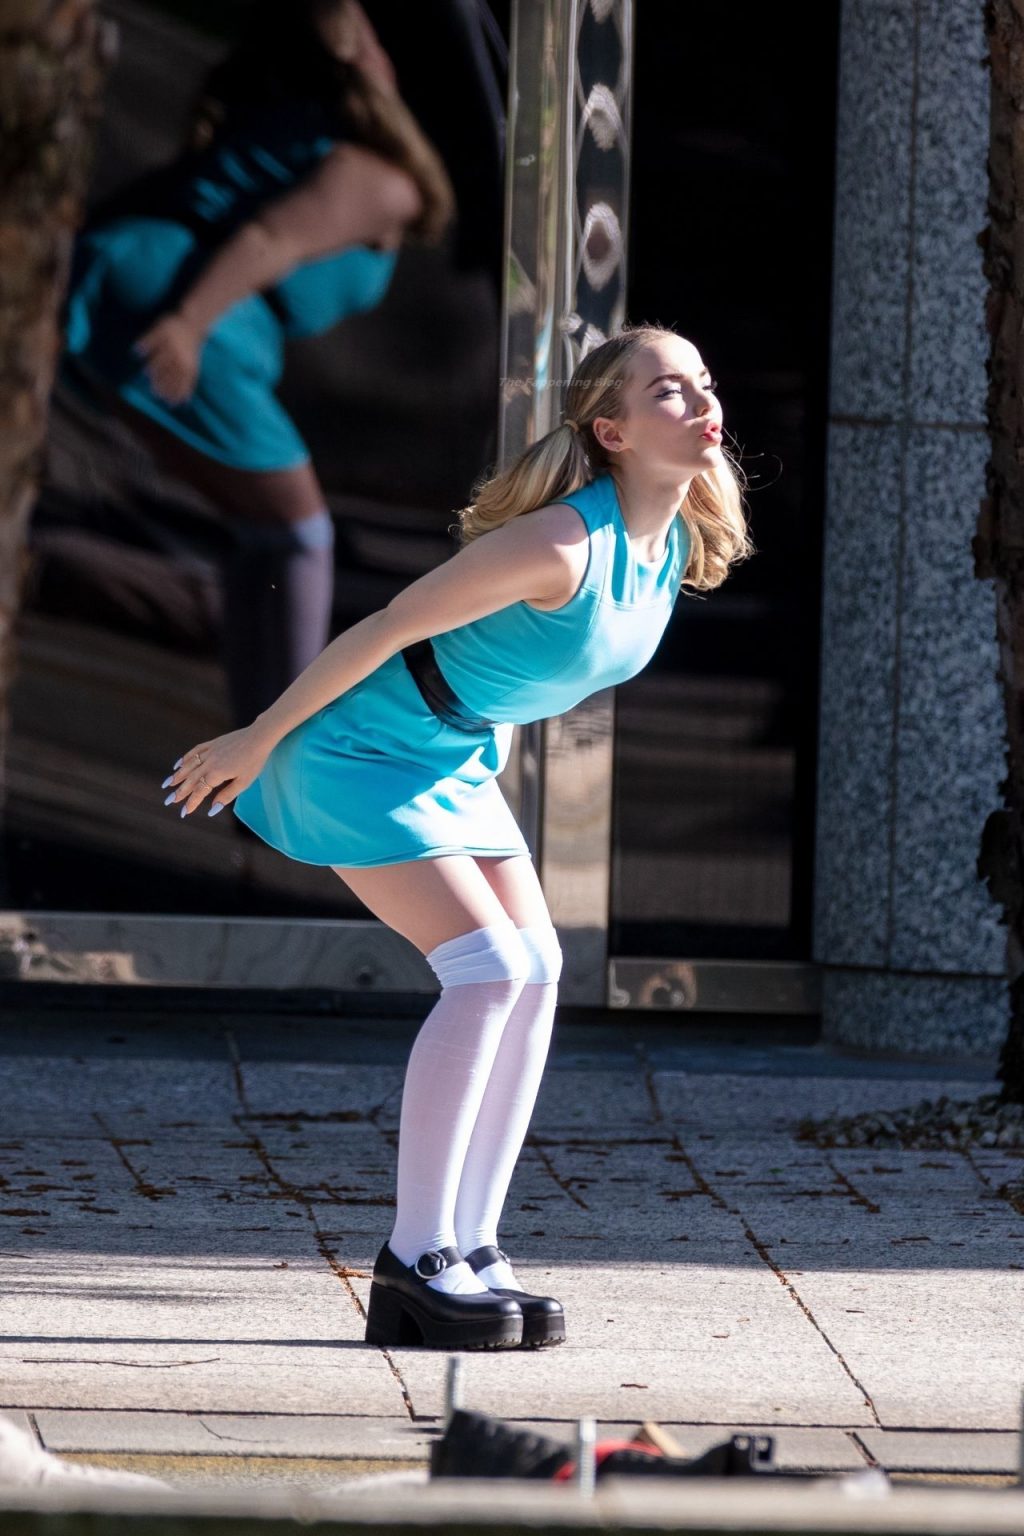 Dove Cameron Gets Into Character as Bubbles on the Set of “Powerpuff” (27 Photos)